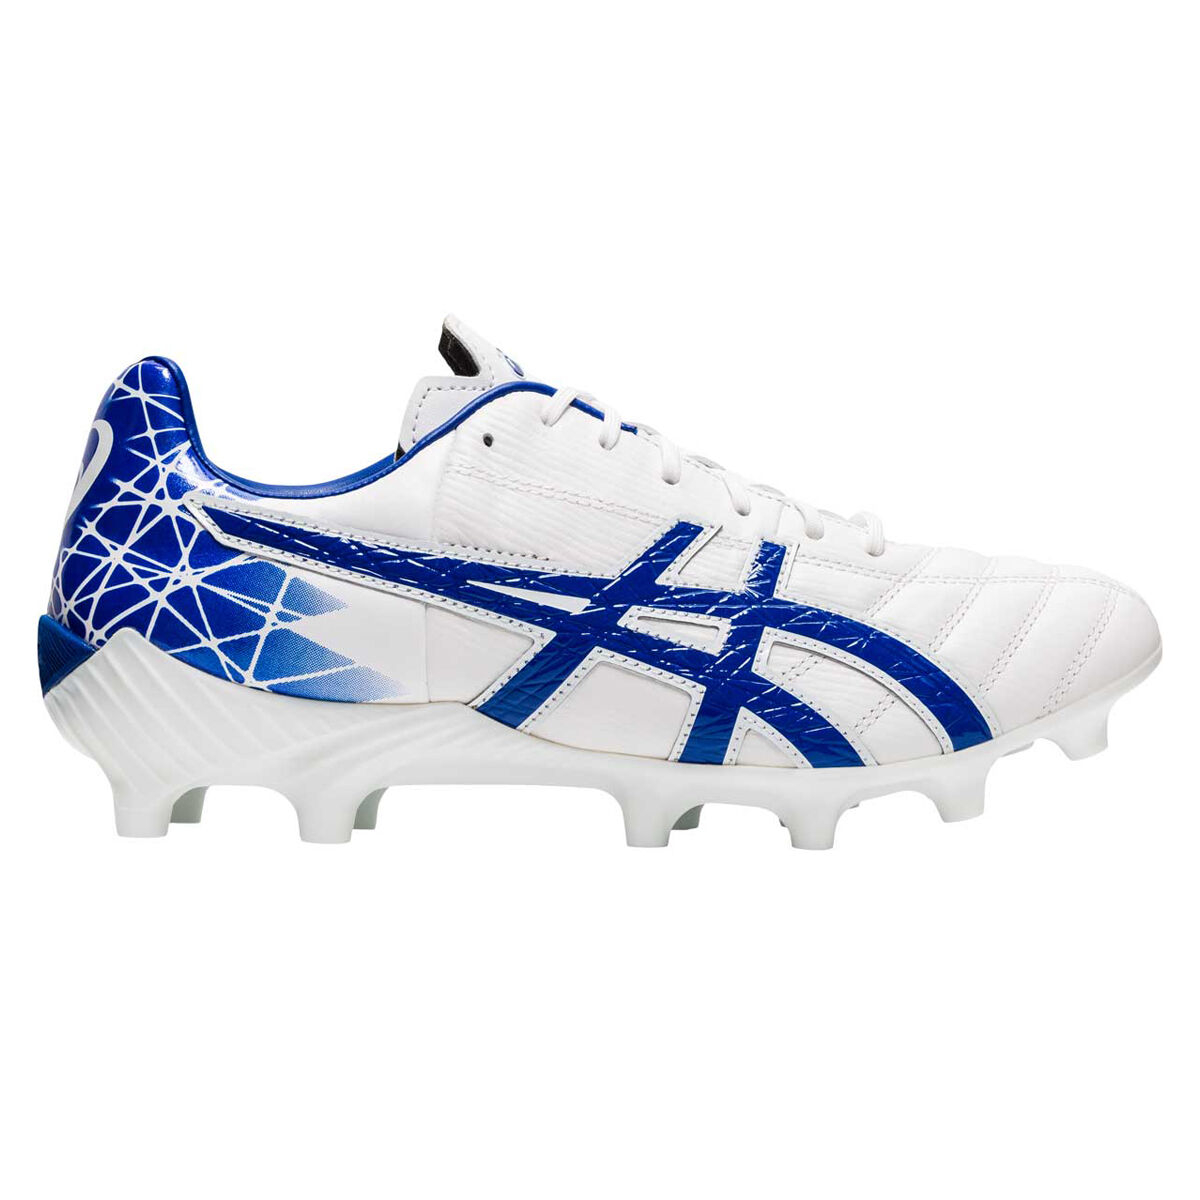 Asics Lethal Tigreor IT Football Boots 